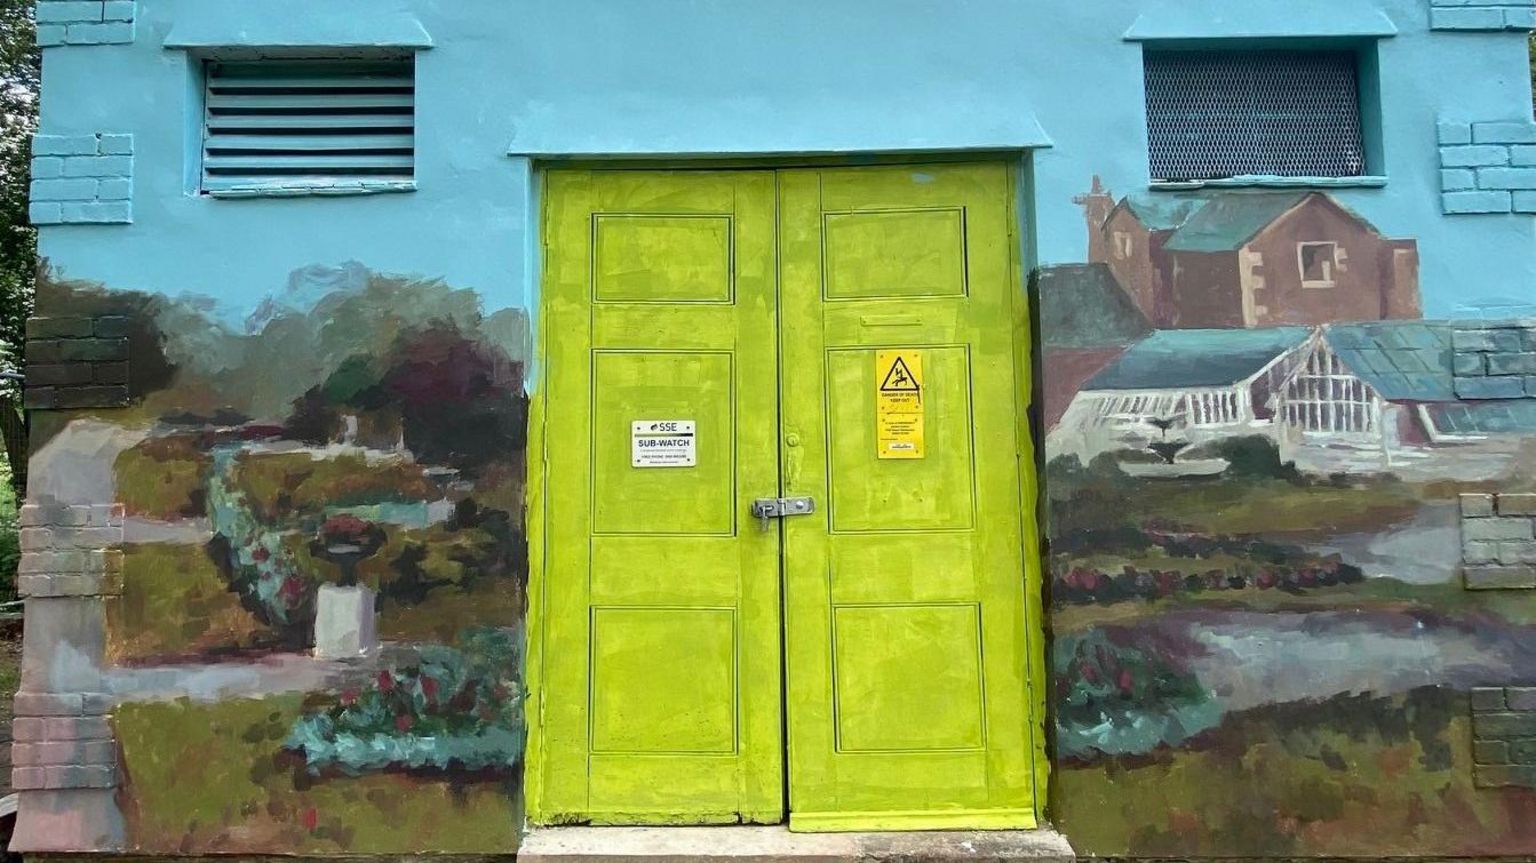 One side of the mural around a bright green doorway